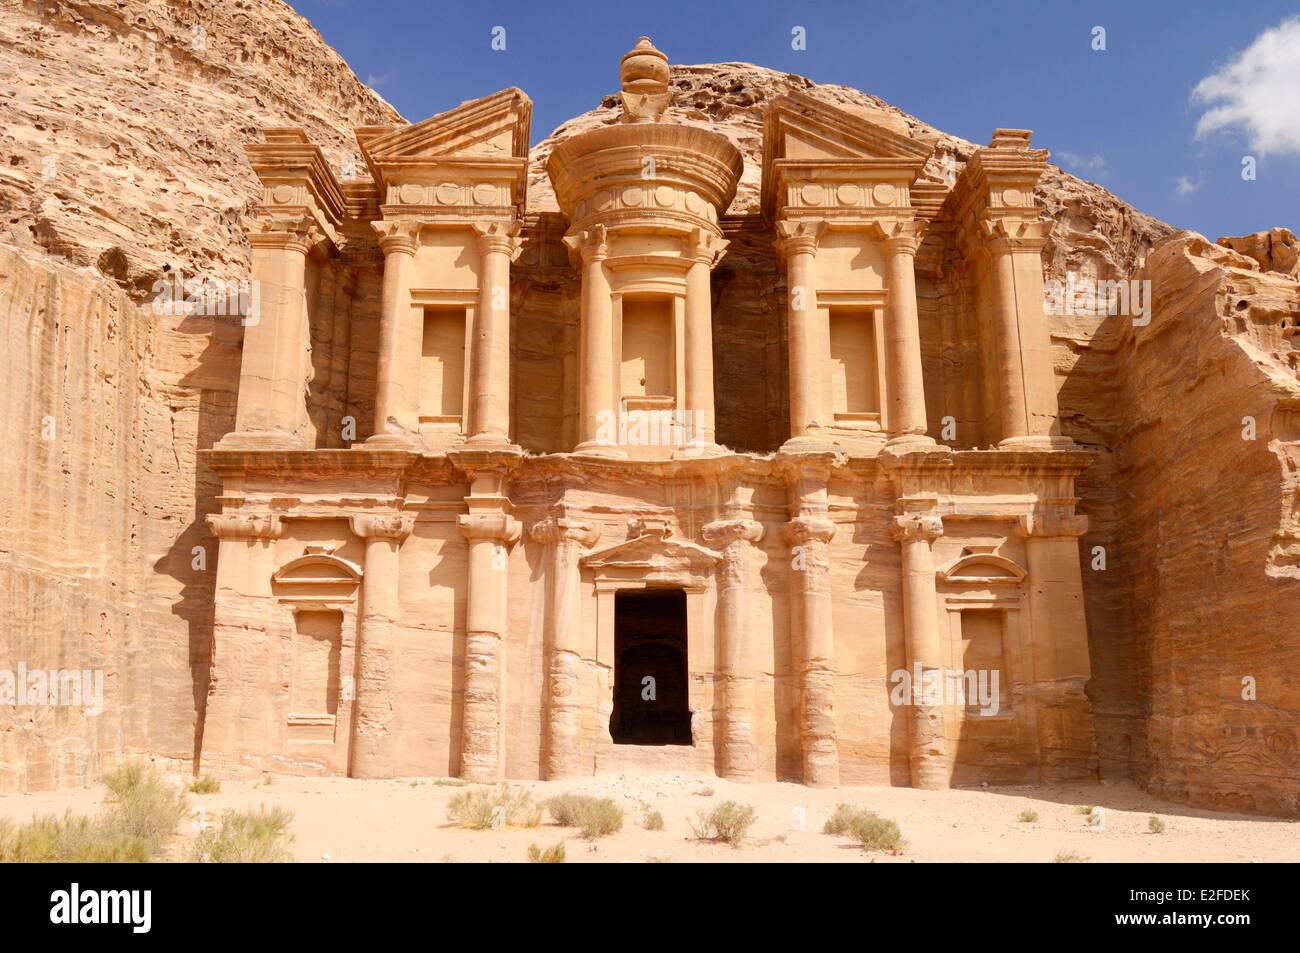 Jordan Ma'an Governorate Nabaean archeological site of Petra listed as  World Heritage by UNESCO El Deir Monastery Petra facade Stock Photo - Alamy